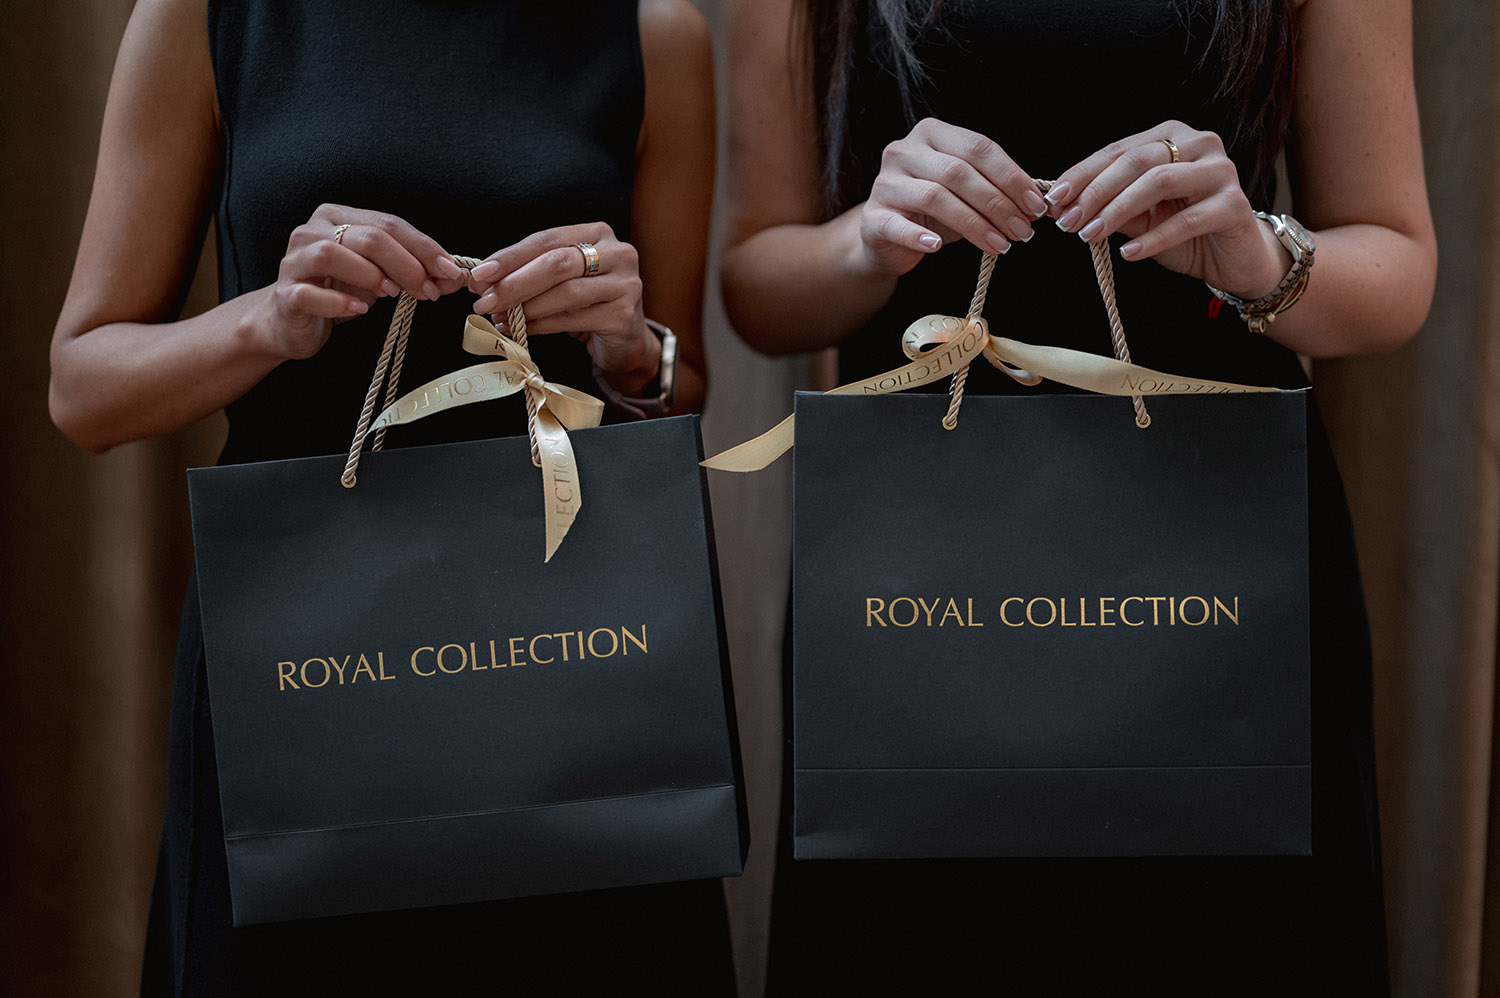 Royal collection: Grand opening